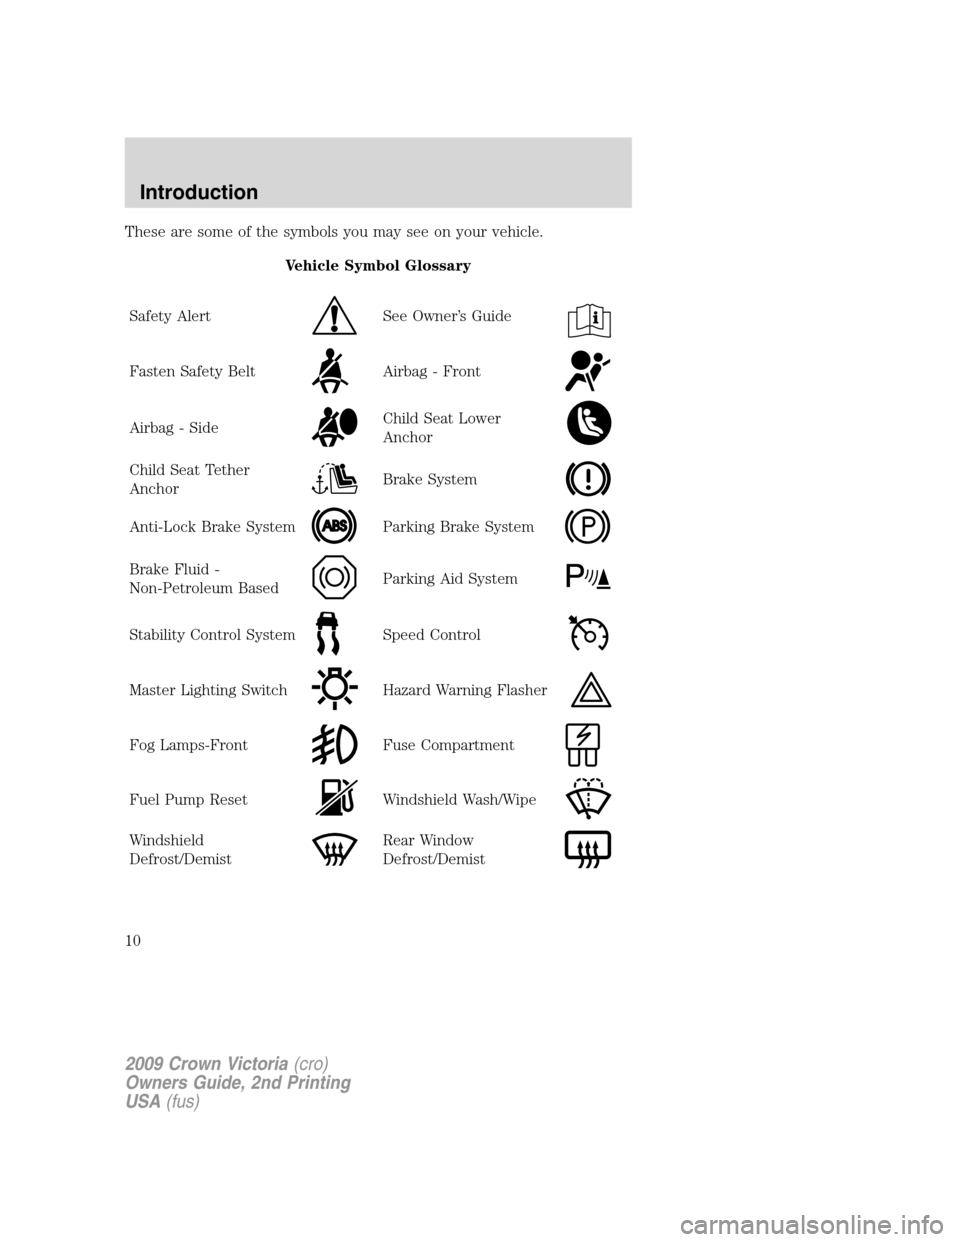 FORD CROWN VICTORIA 2009 2.G Owners Manual These are some of the symbols you may see on your vehicle.
Vehicle Symbol Glossary
Safety Alert
See Owner’s Guide
Fasten Safety BeltAirbag - Front
Airbag - SideChild Seat Lower
Anchor
Child Seat Tet